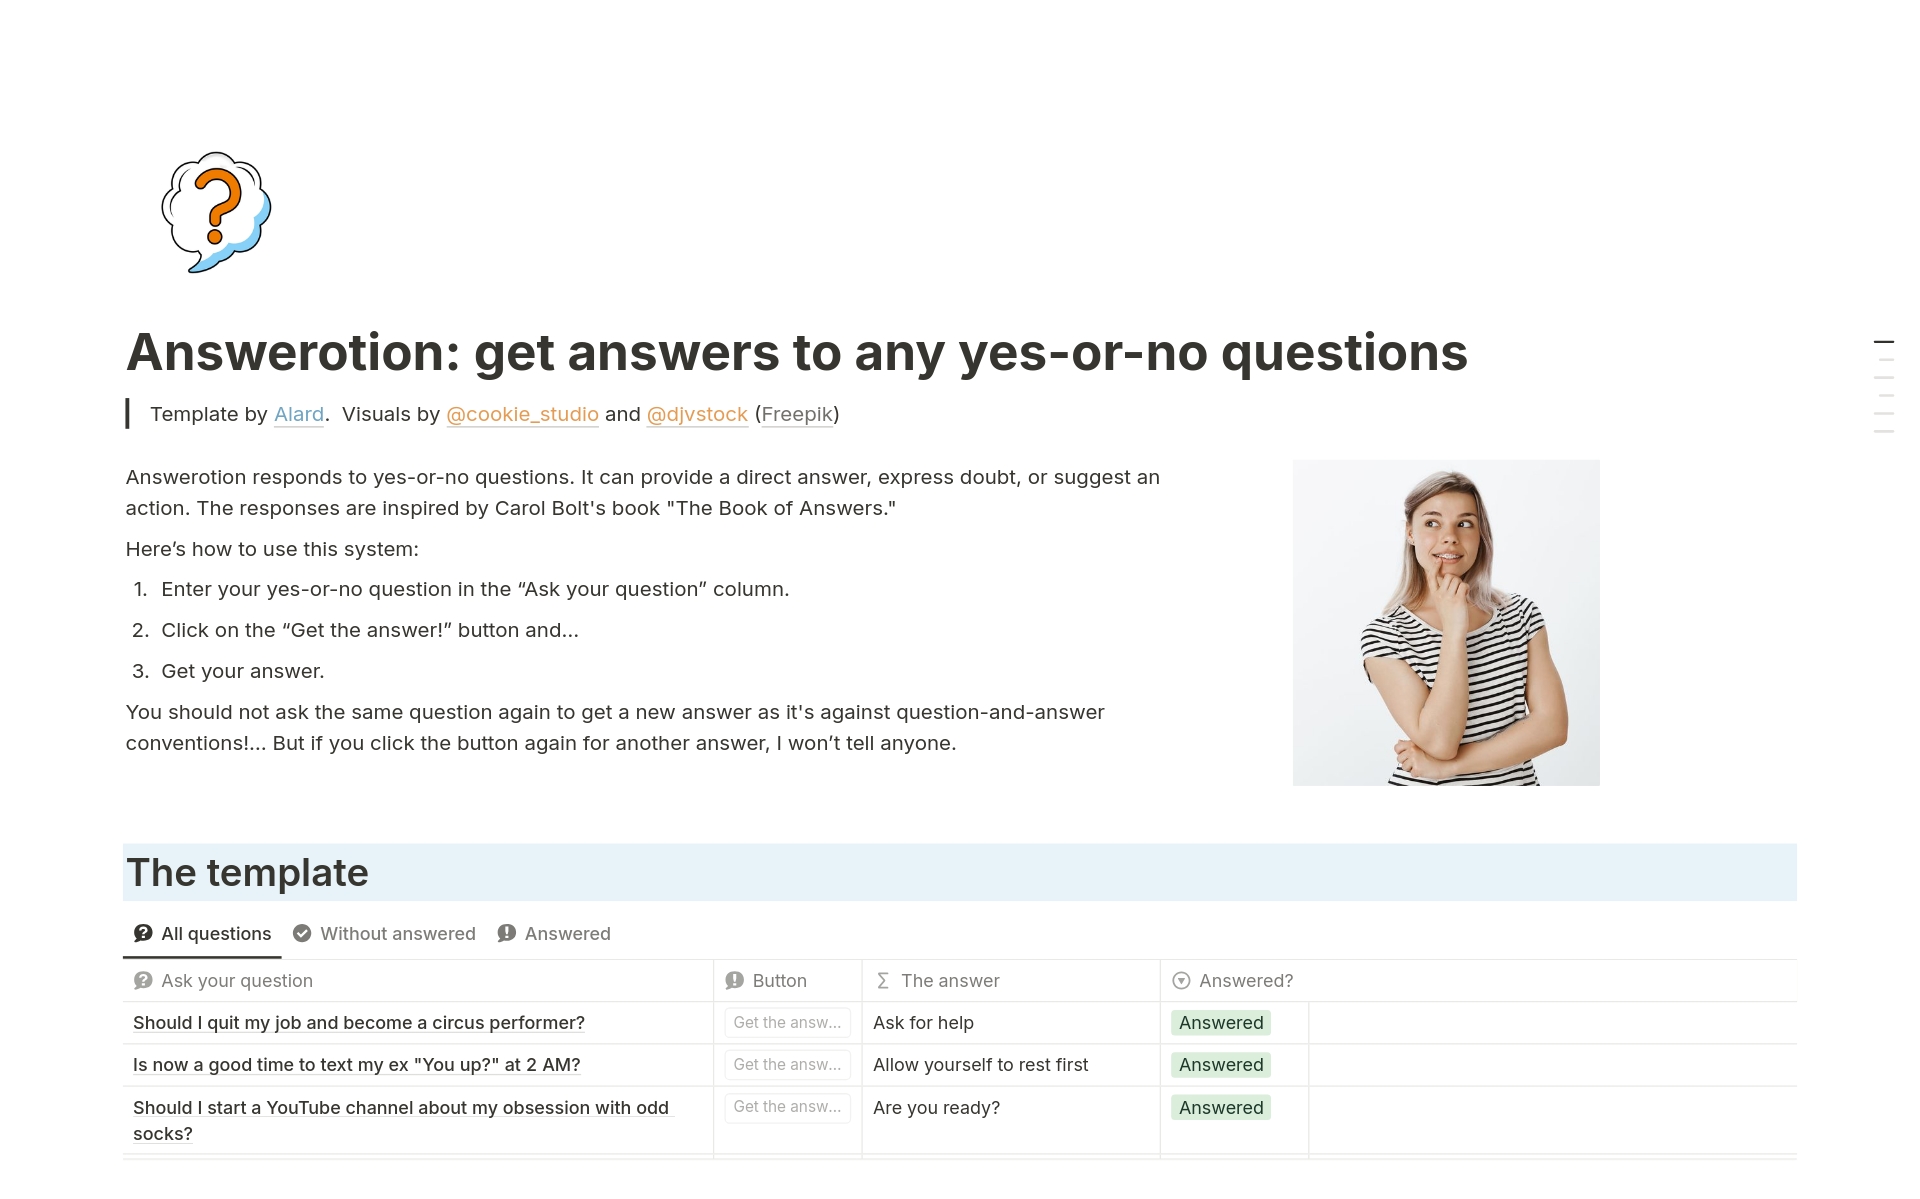 Answerotion: get answers to yes-or-no questions님의 템플릿 미리보기